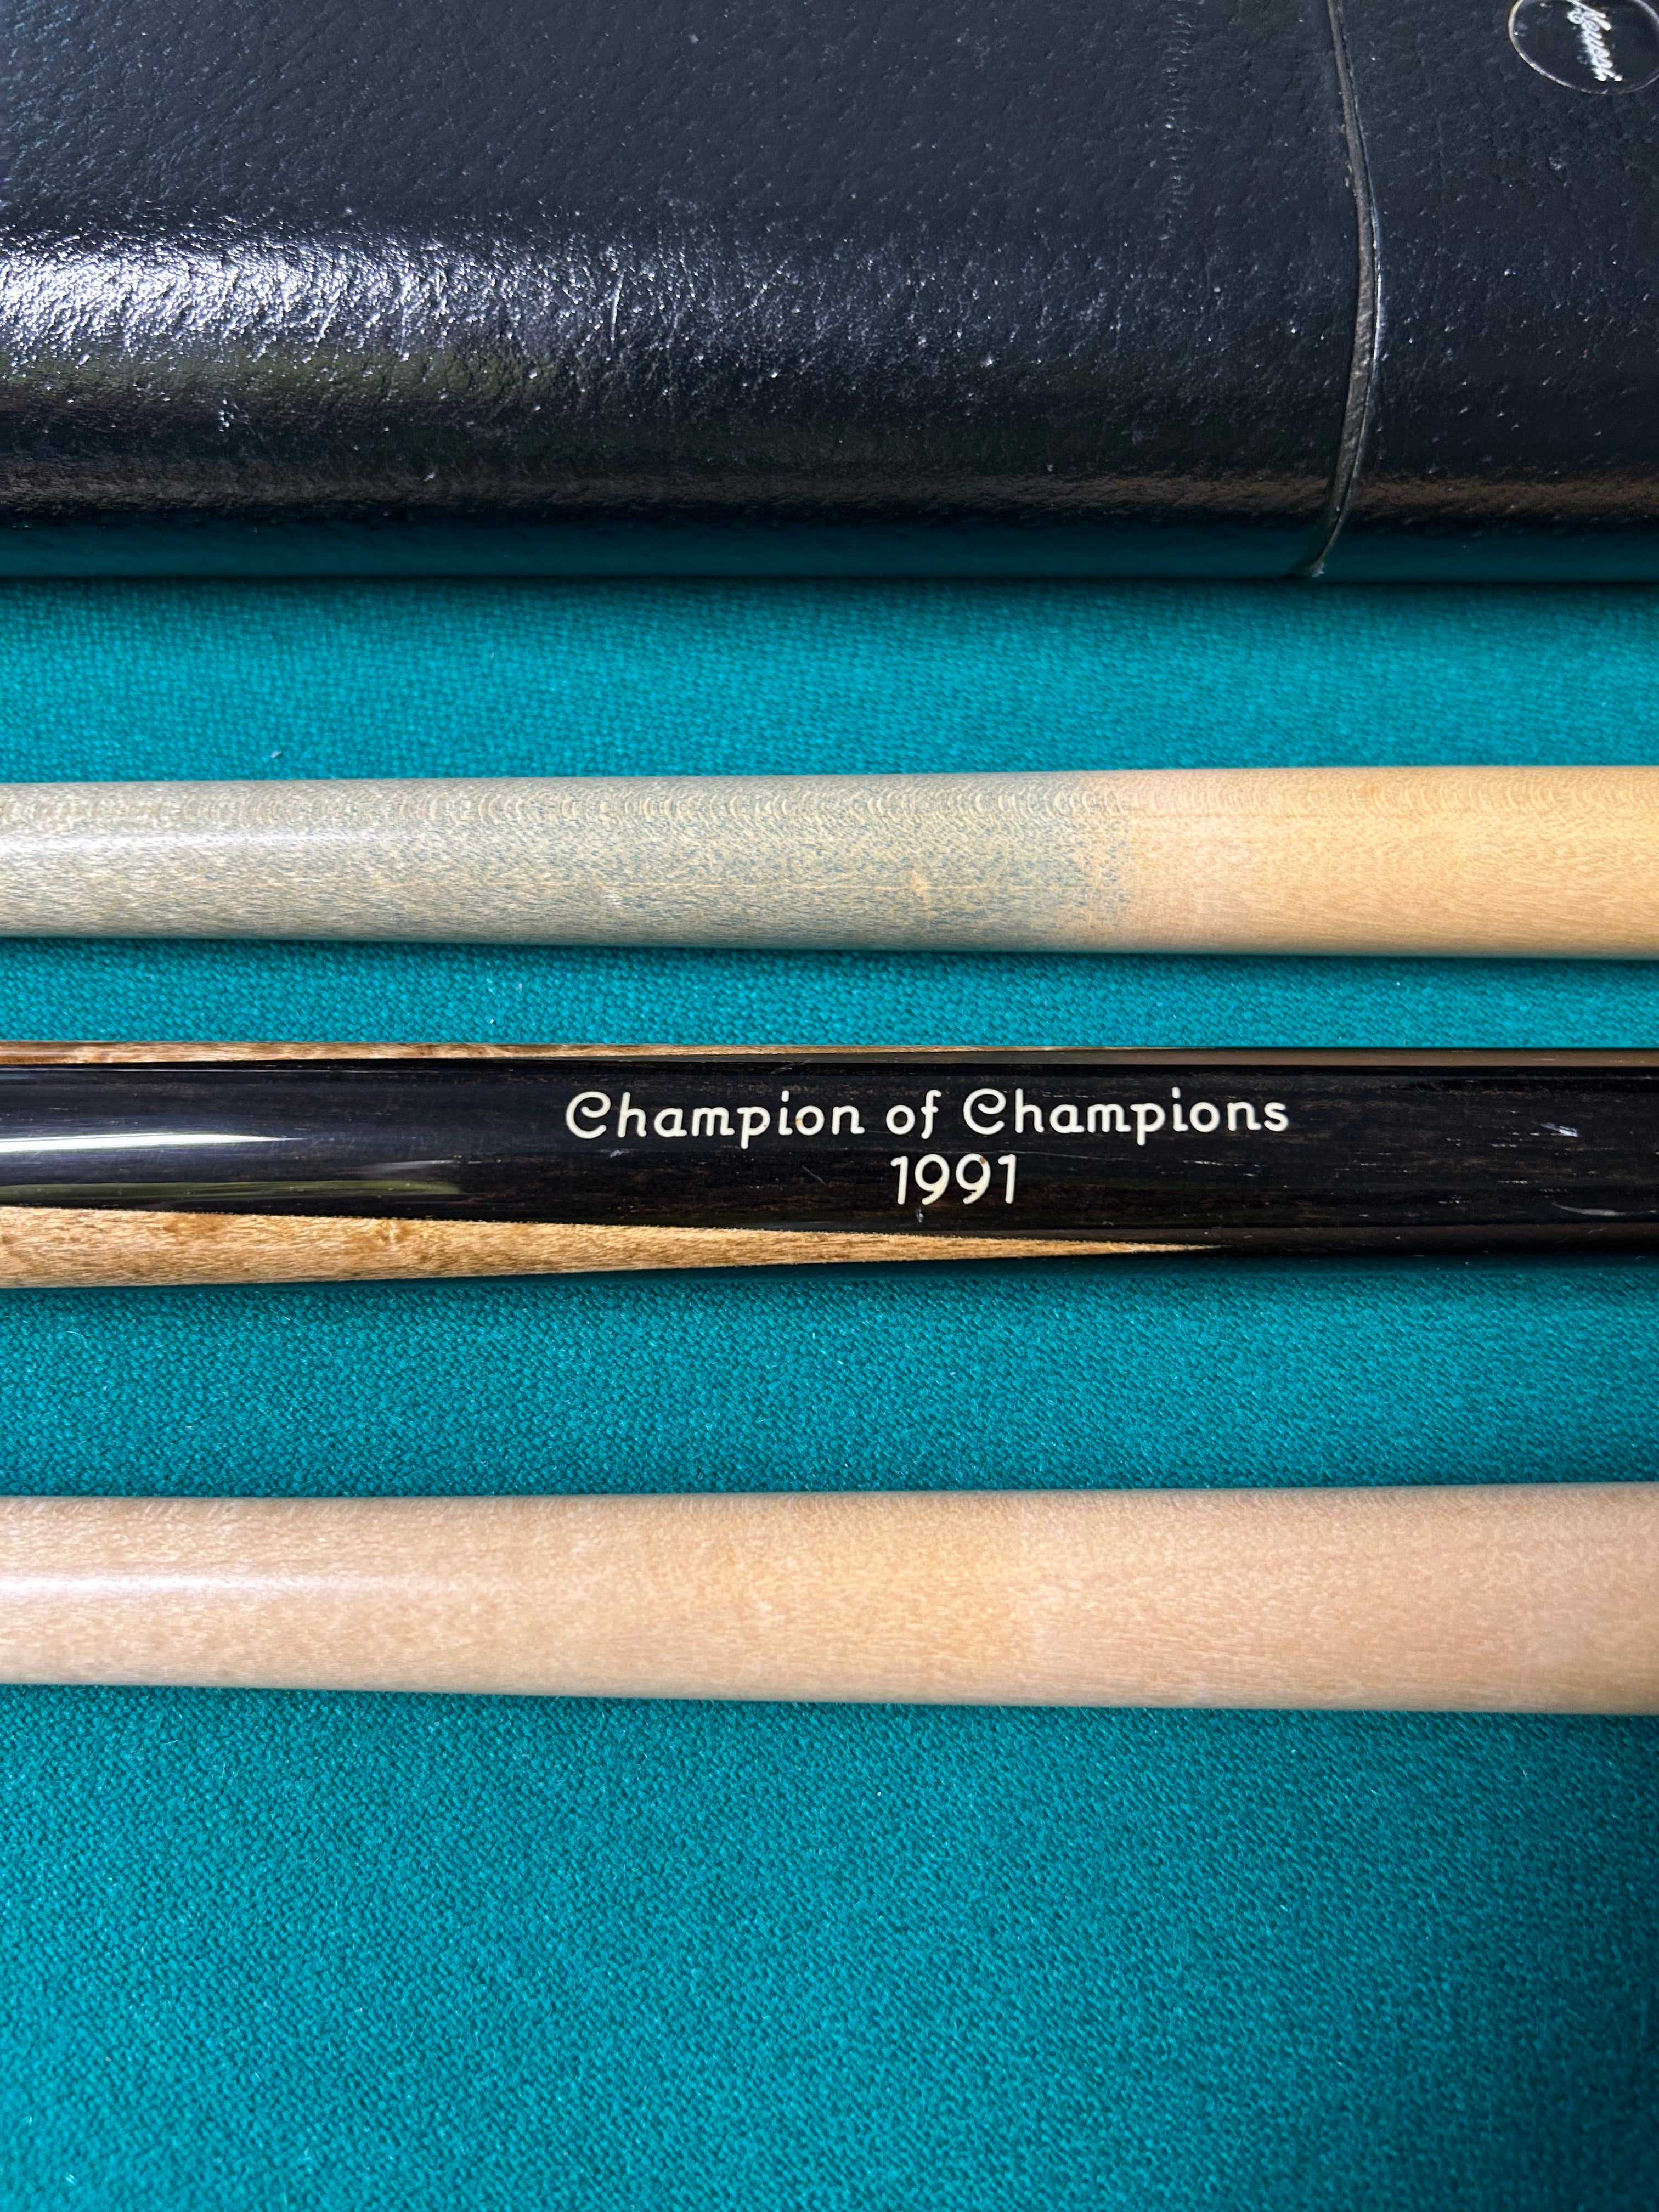 1991 Challenge of Champions Meucci Cue and Case won by Mike Lebron from the Lebron/ Hall ESPN Match and the Meucci Hard Case 📞